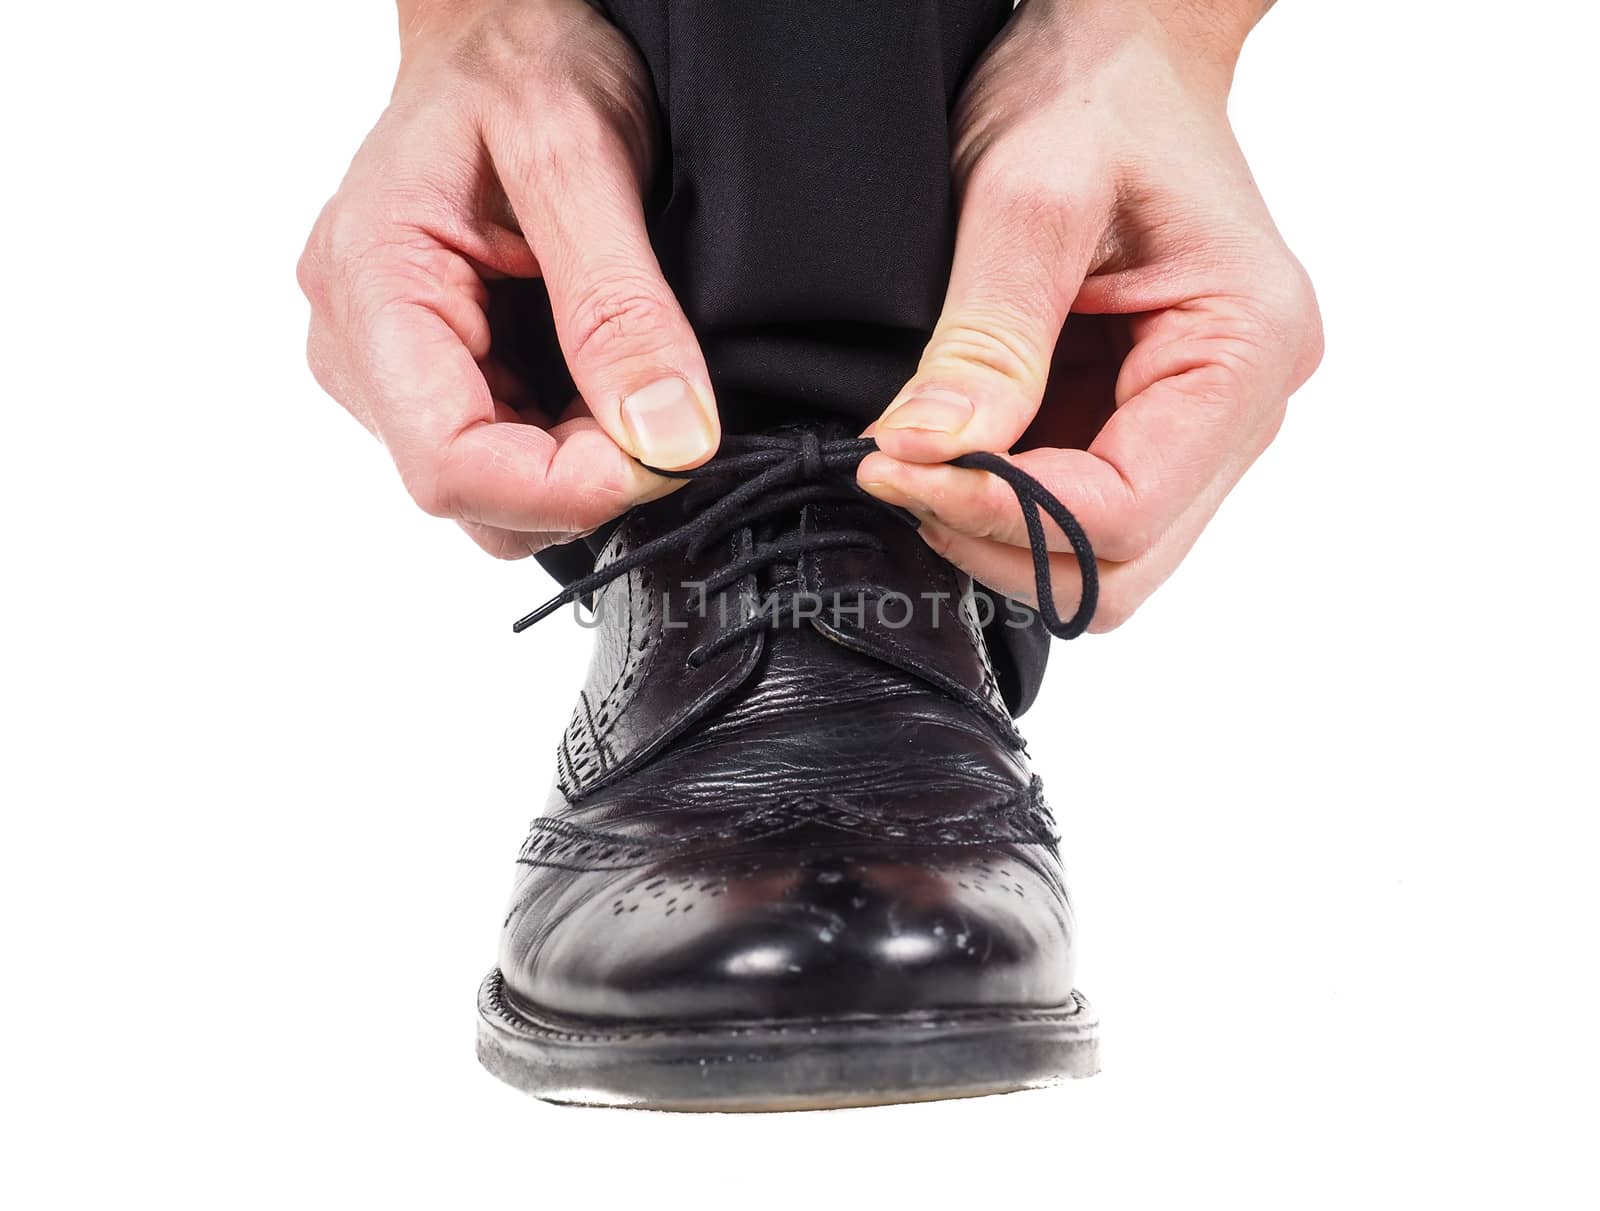 Closeup of male hands tying shoe laces on black leather shoes wearing suit towards white